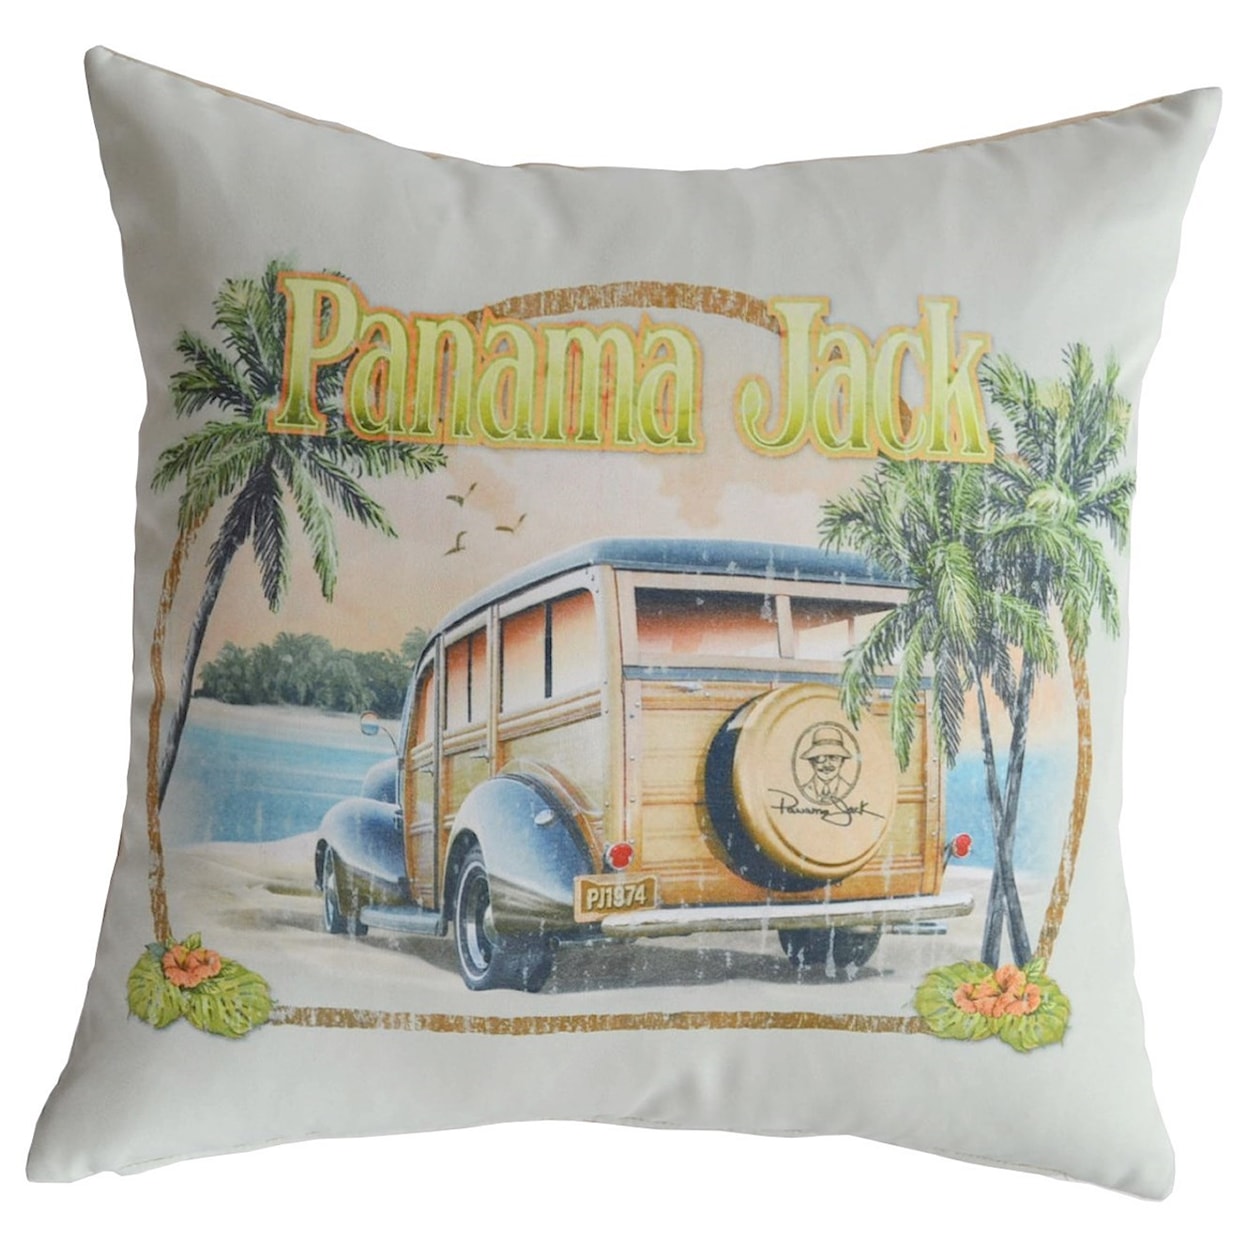 Pelican Reef Panama Jack Pillows and Ottomans No Problems Throw Pillow